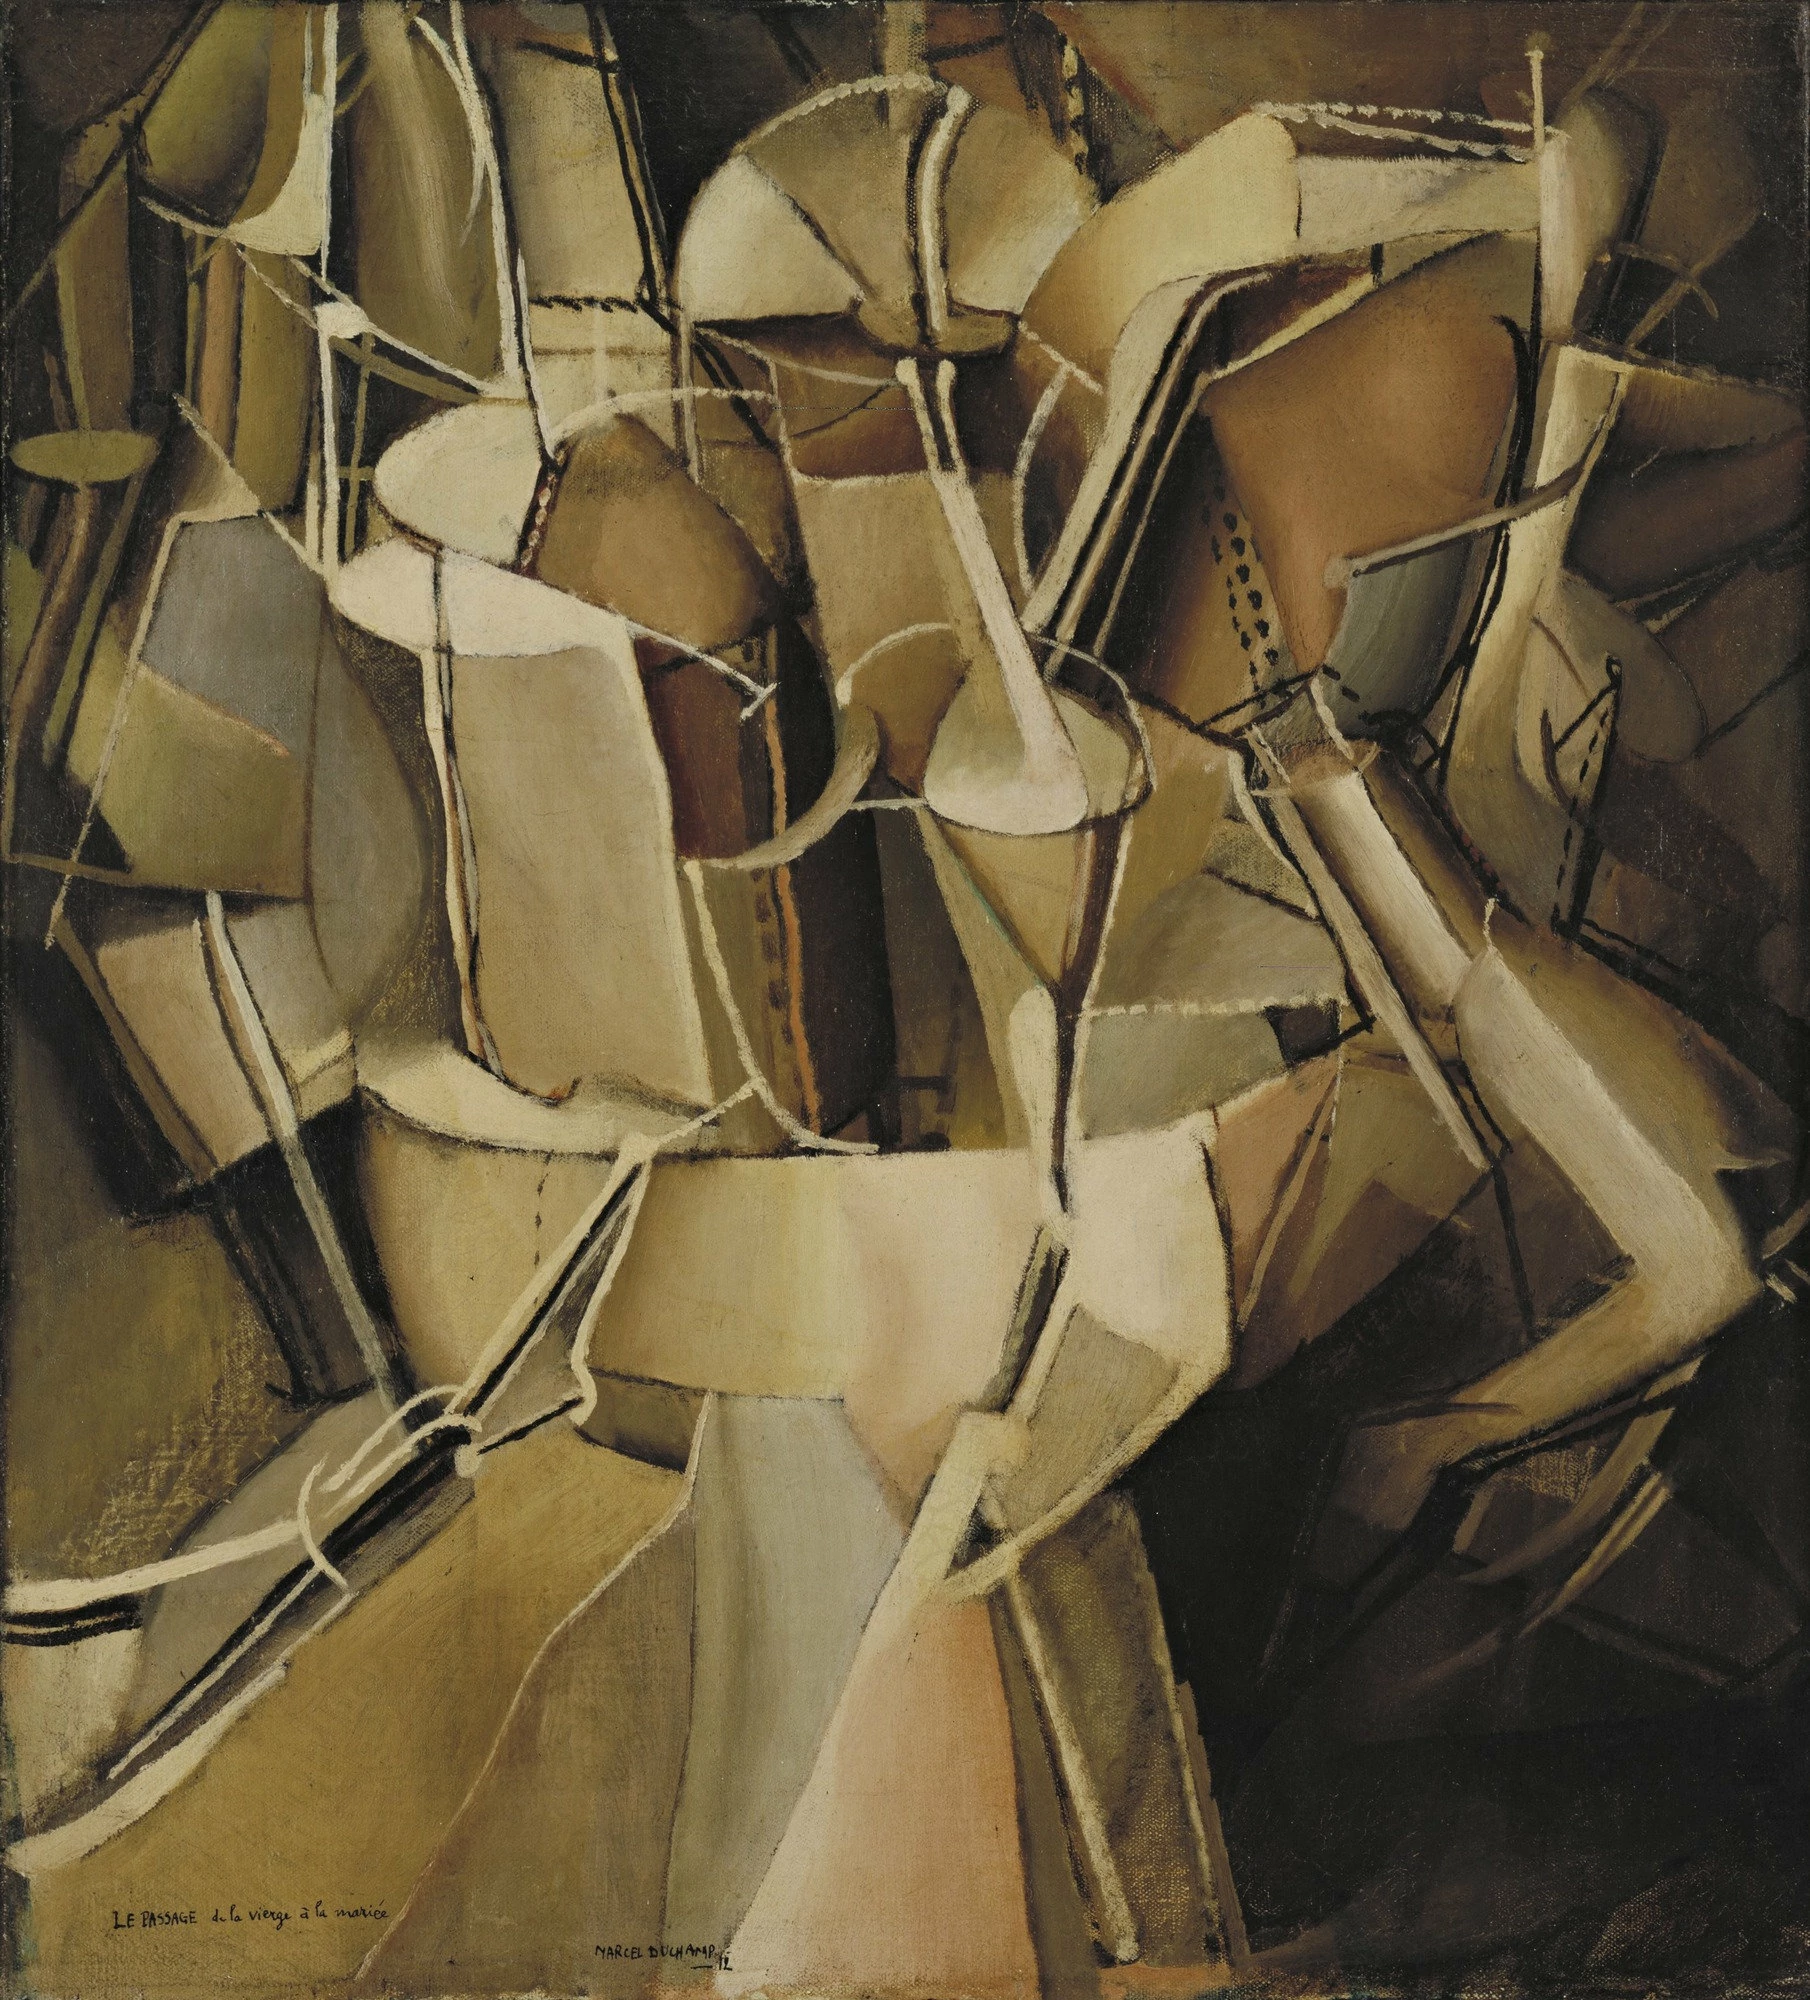 The Passage from Virgin to Bride, Marcel Duchamp